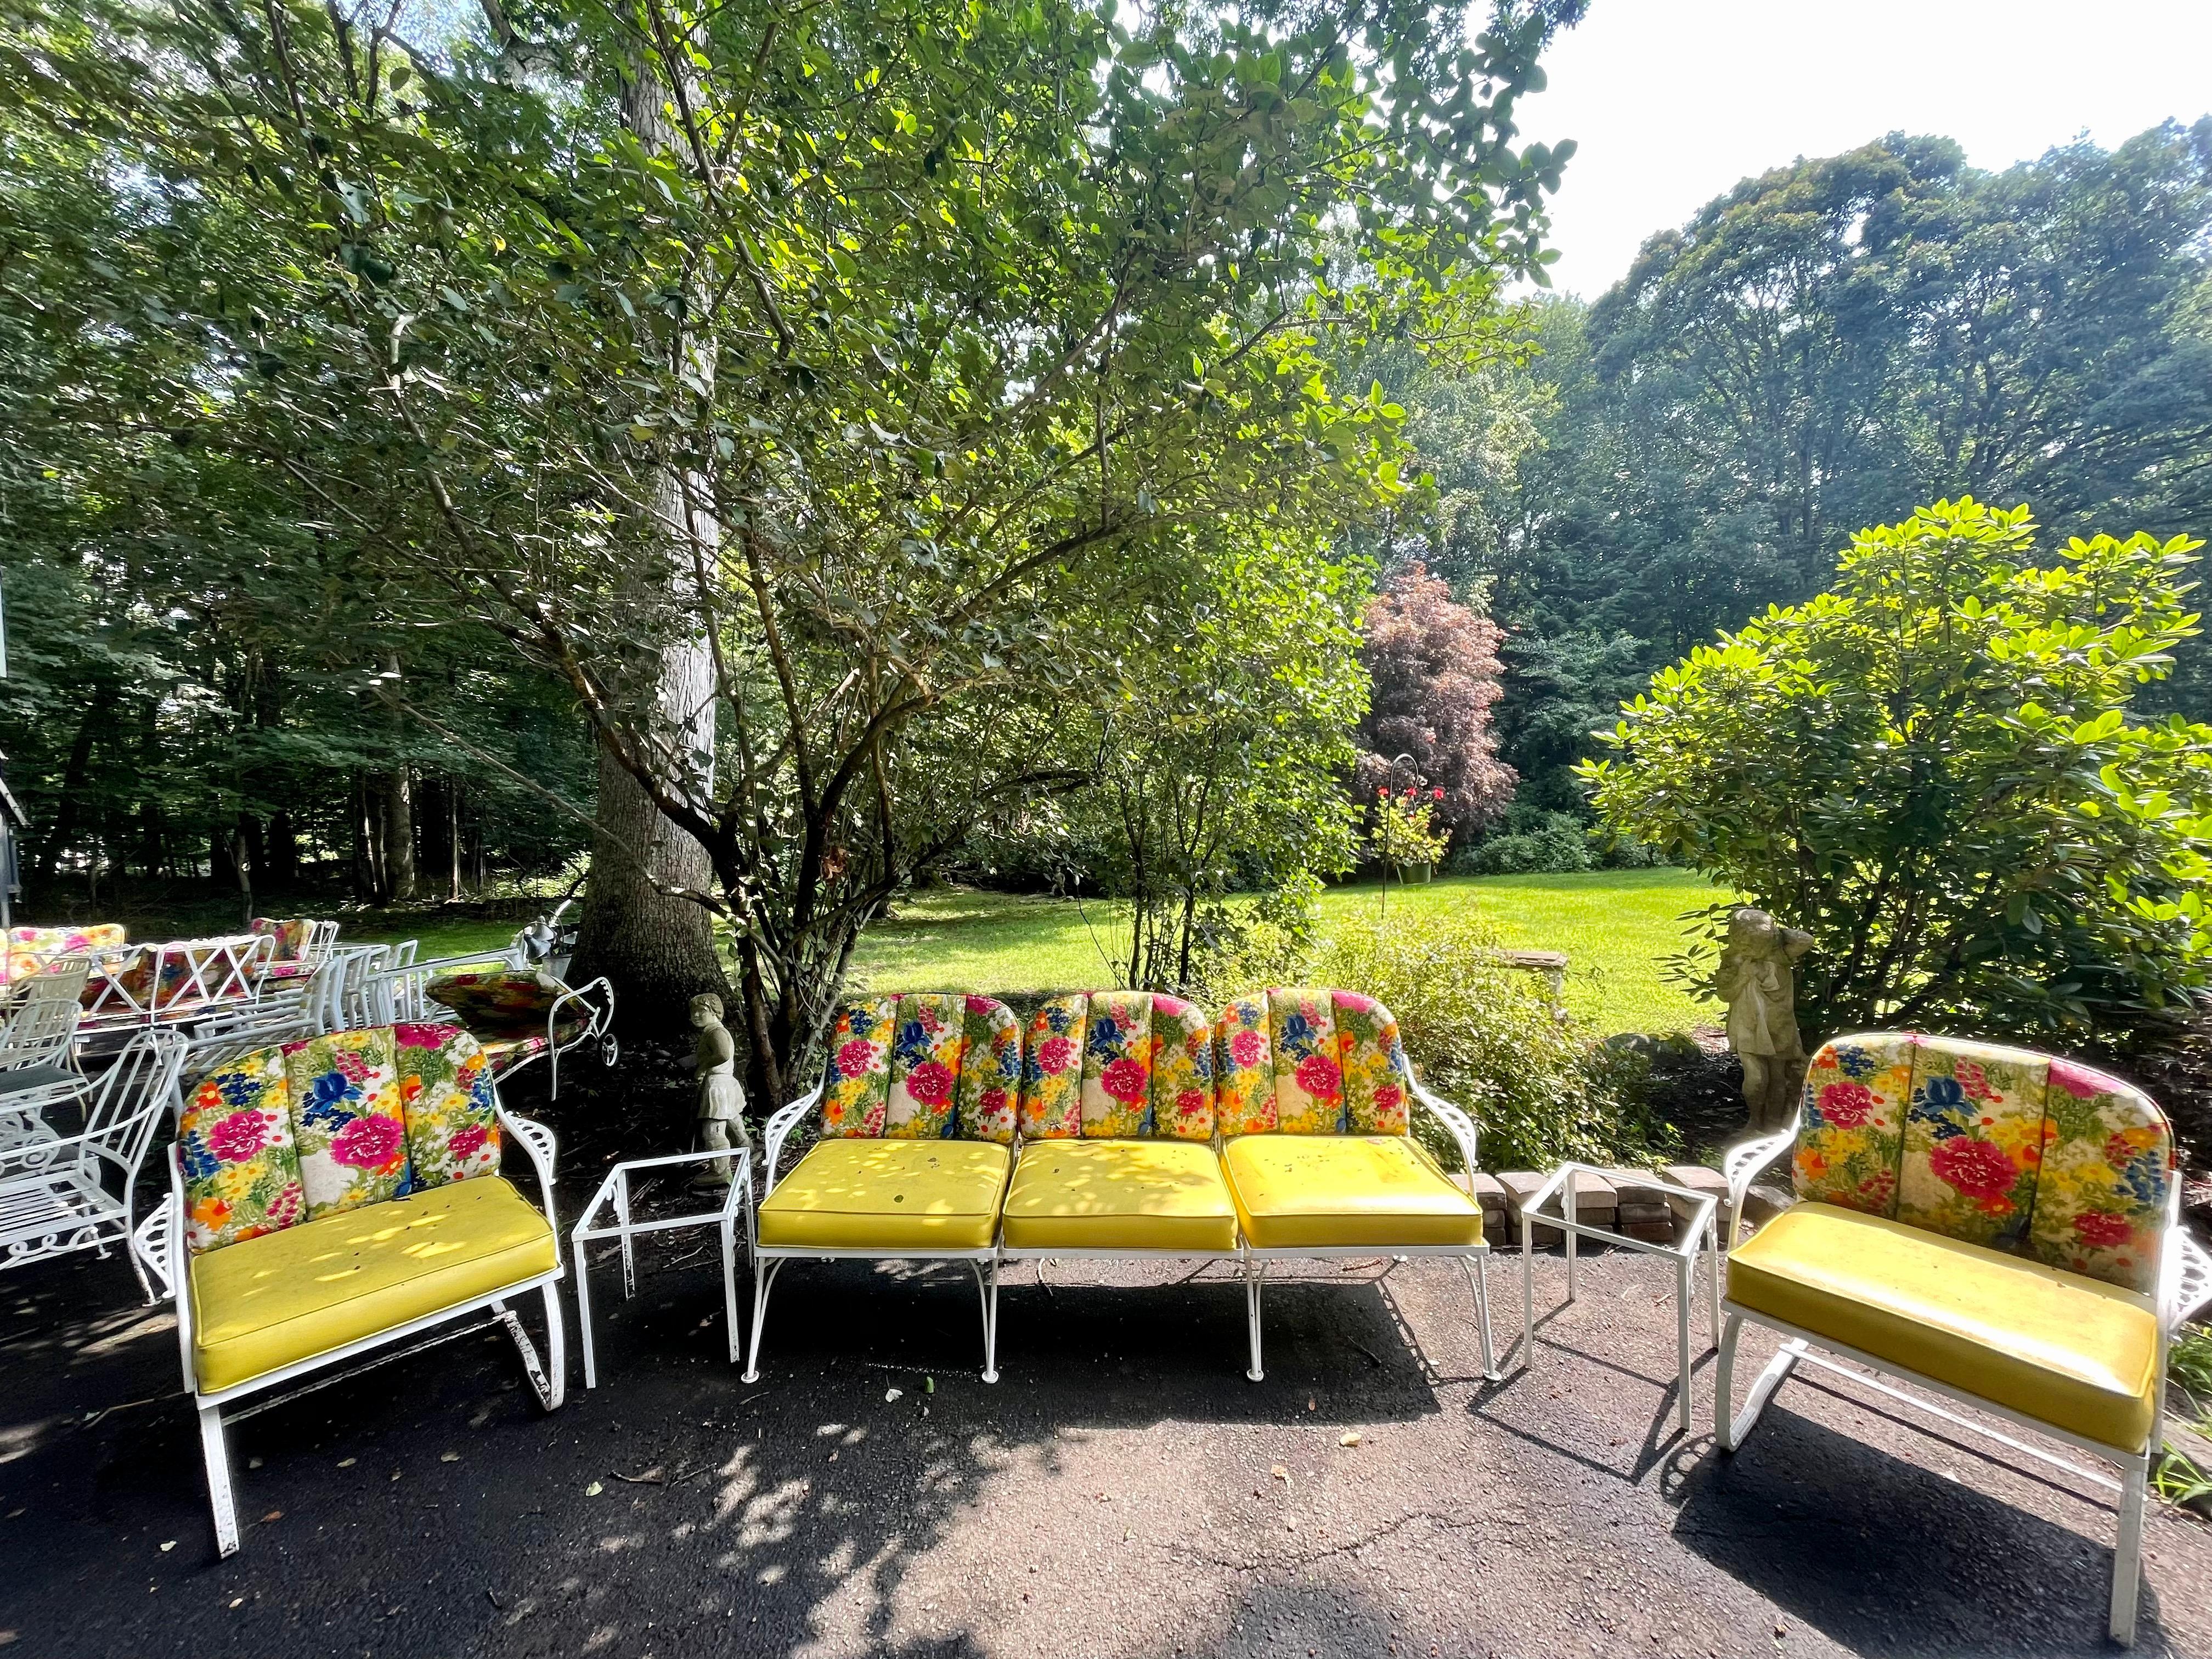 This unique and elegant patio set from The Molla Company was salvaged from an estate in Greenwich, CT. Aluminum furniture with bright yellow and floral cushions. Set includes 1 three seater, 2 club chairs, 2 side tables. Only one owner, in fantastic